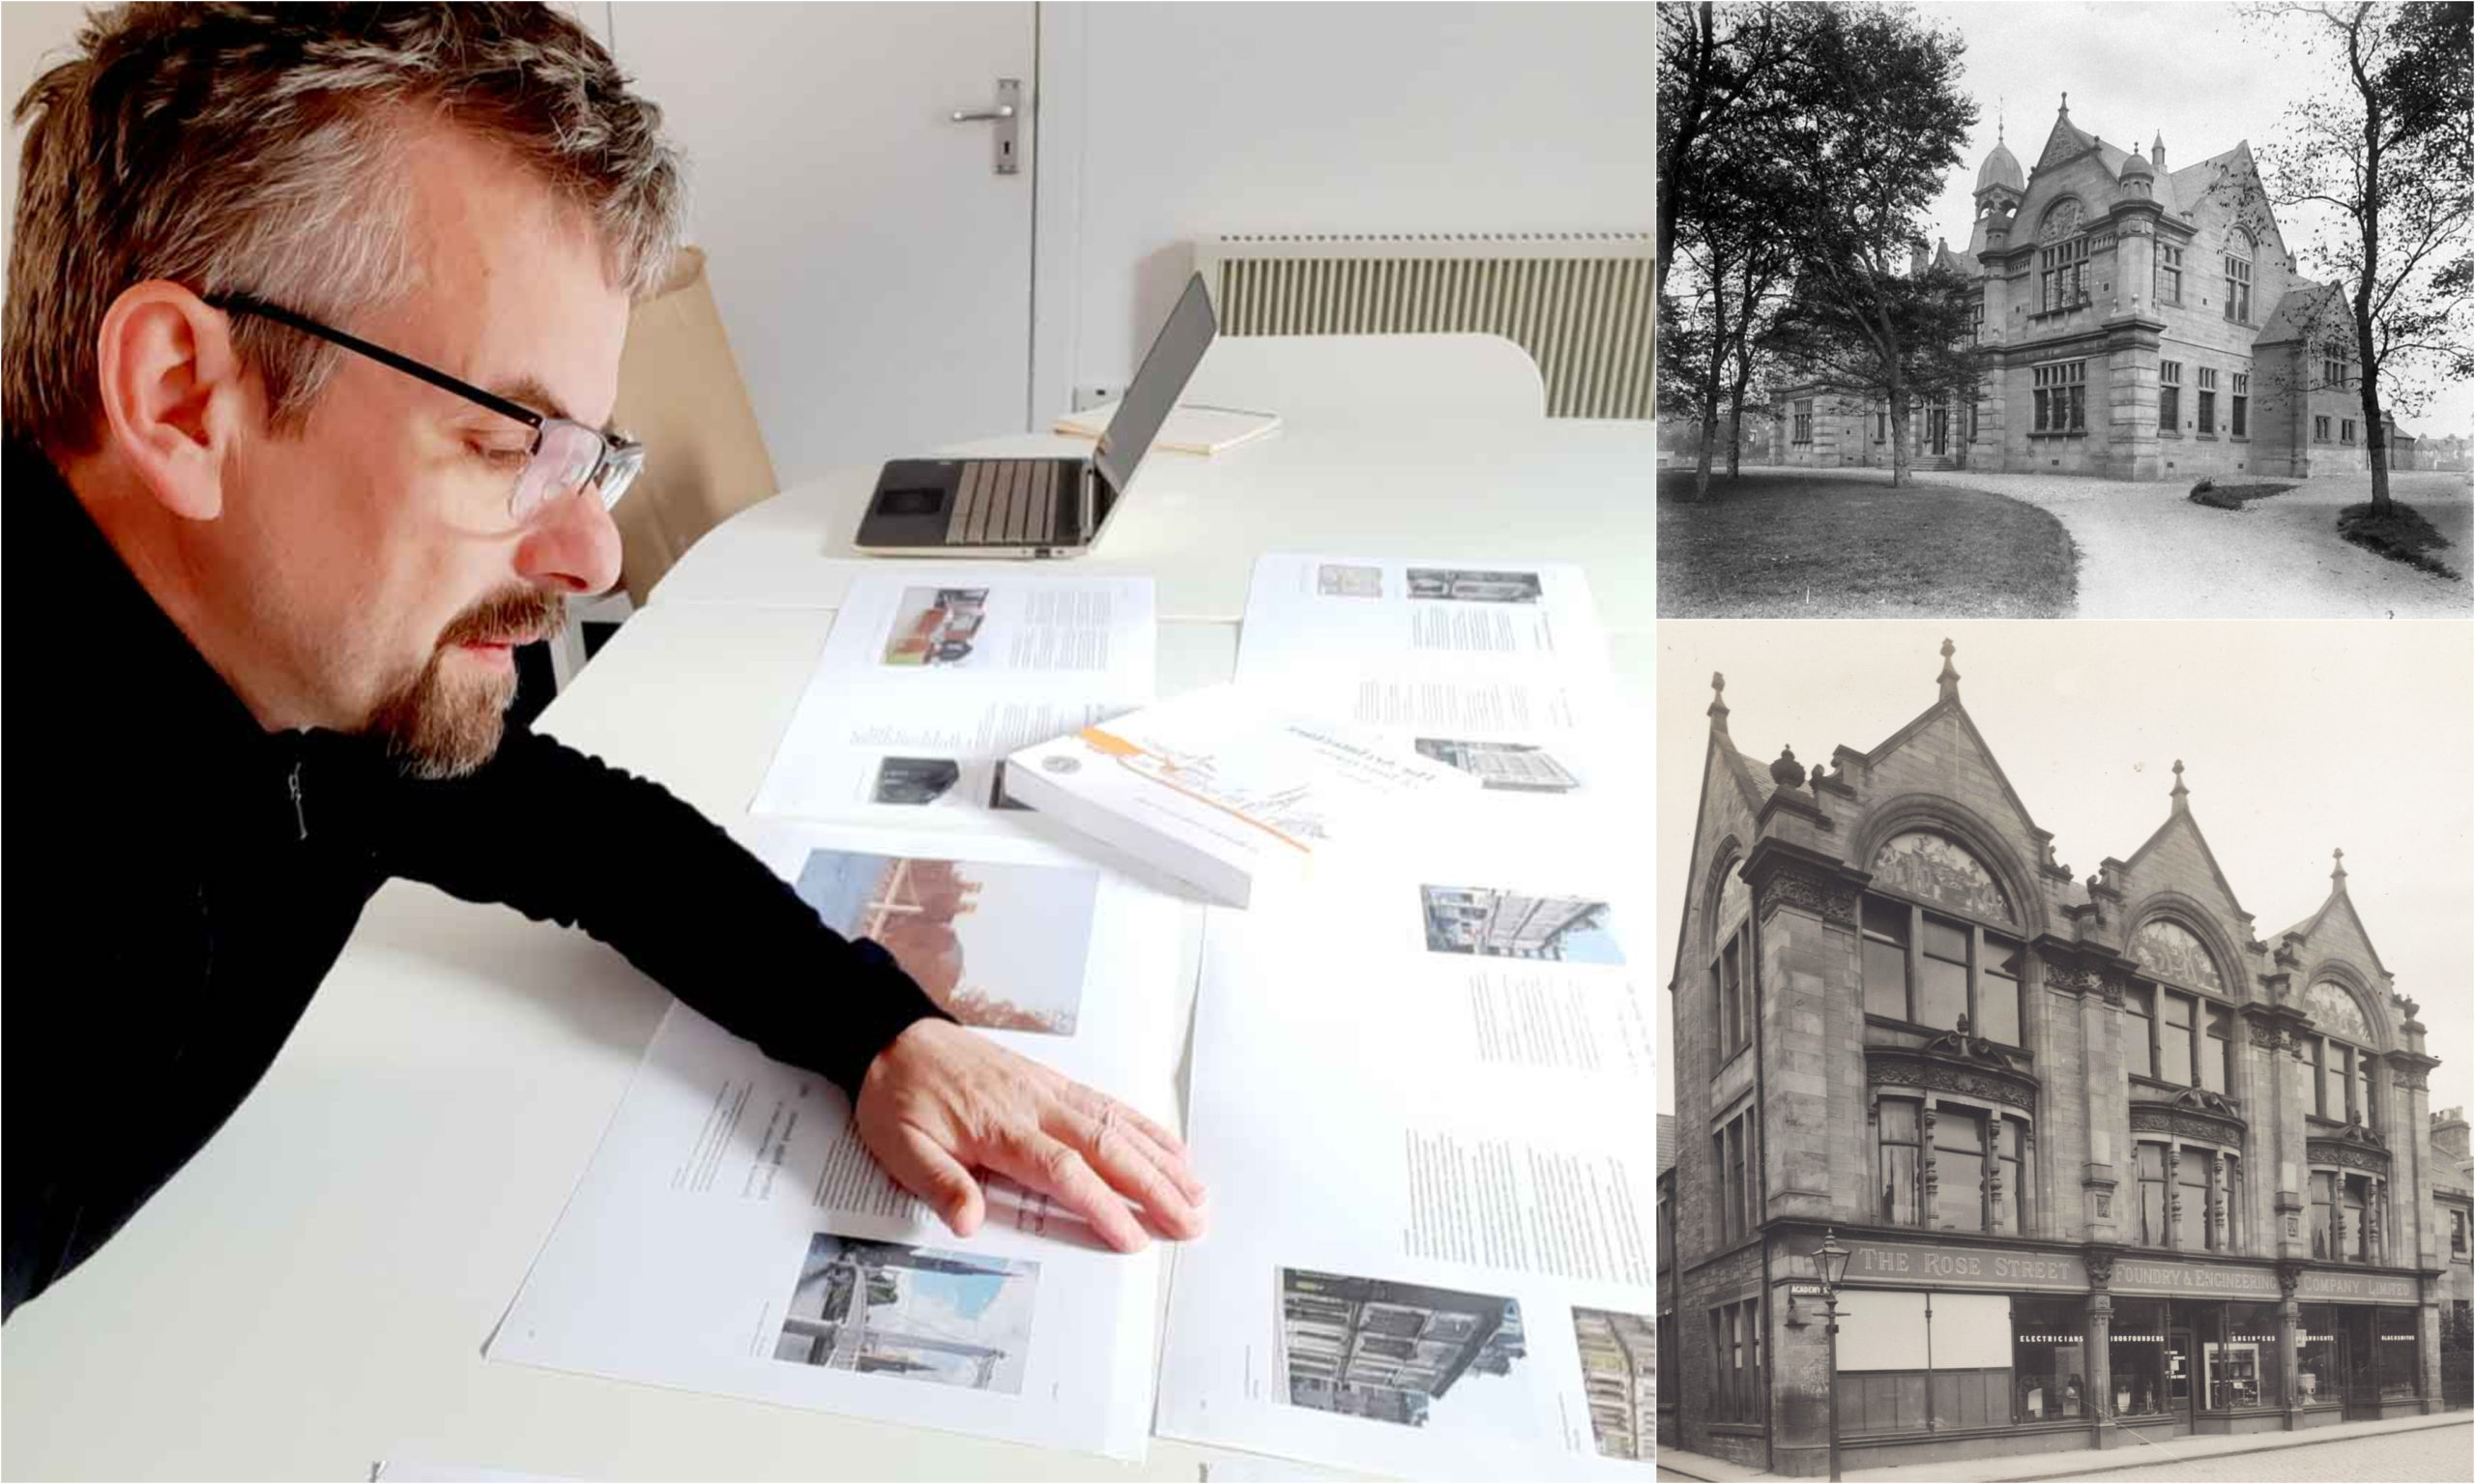 Calum Maclean, who owns architectural practice MAAC Studio, will deliver the talk on the historic Inverness buildings